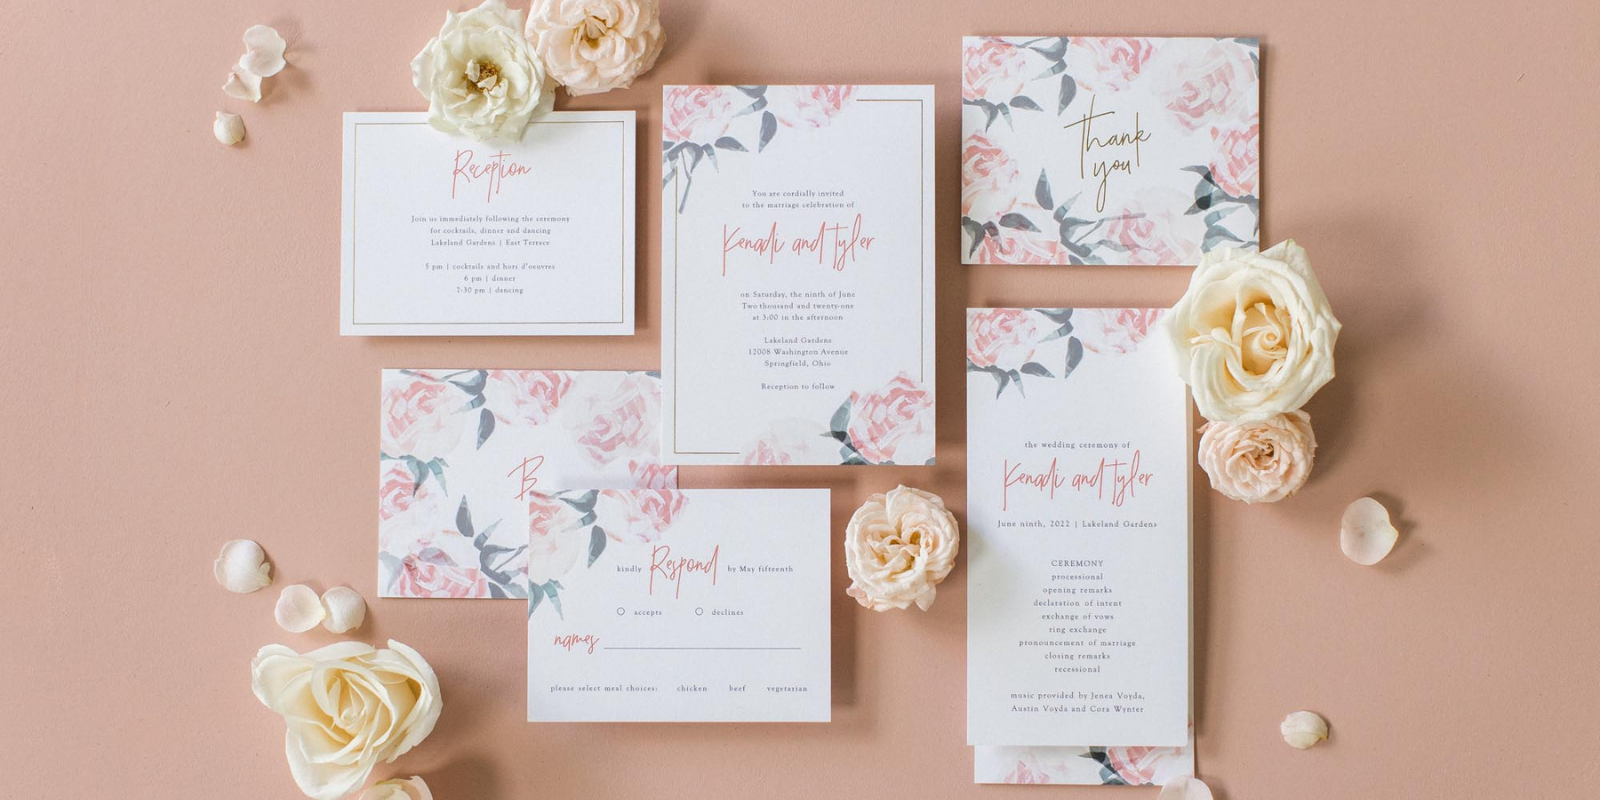 Adorable Ways To Capture A Picture Of Your Wedding Invitation